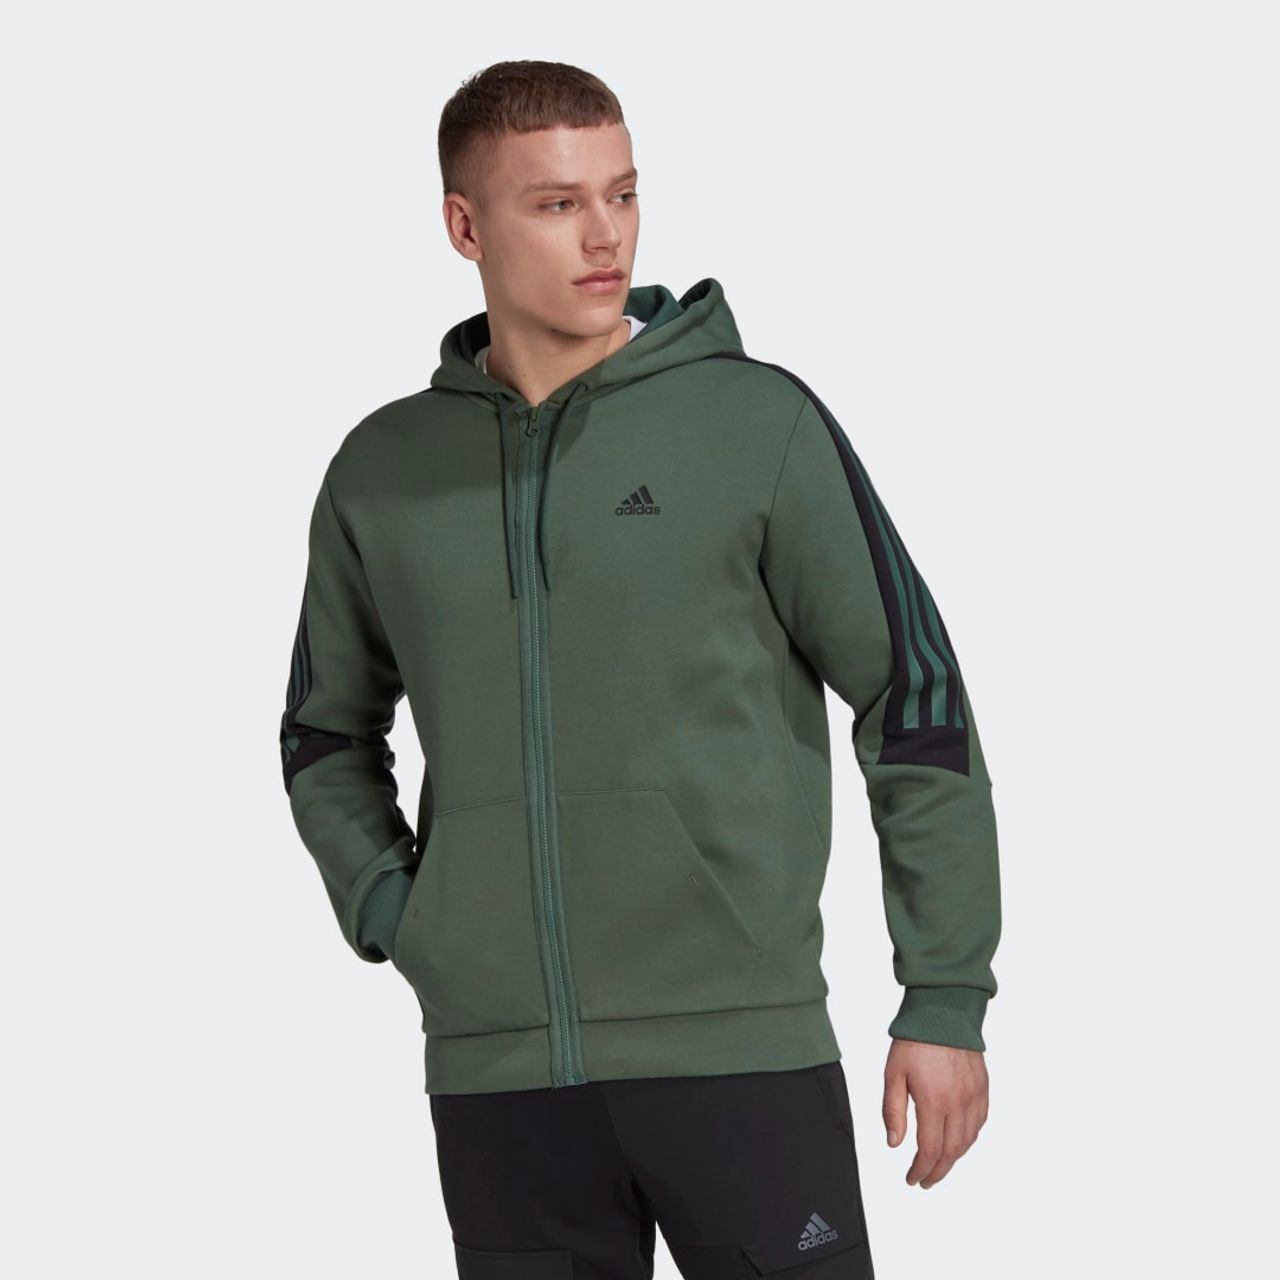 Adidas Future Icons 3-Stripes Full-Zip Hoodie HC5841 - Compare prices